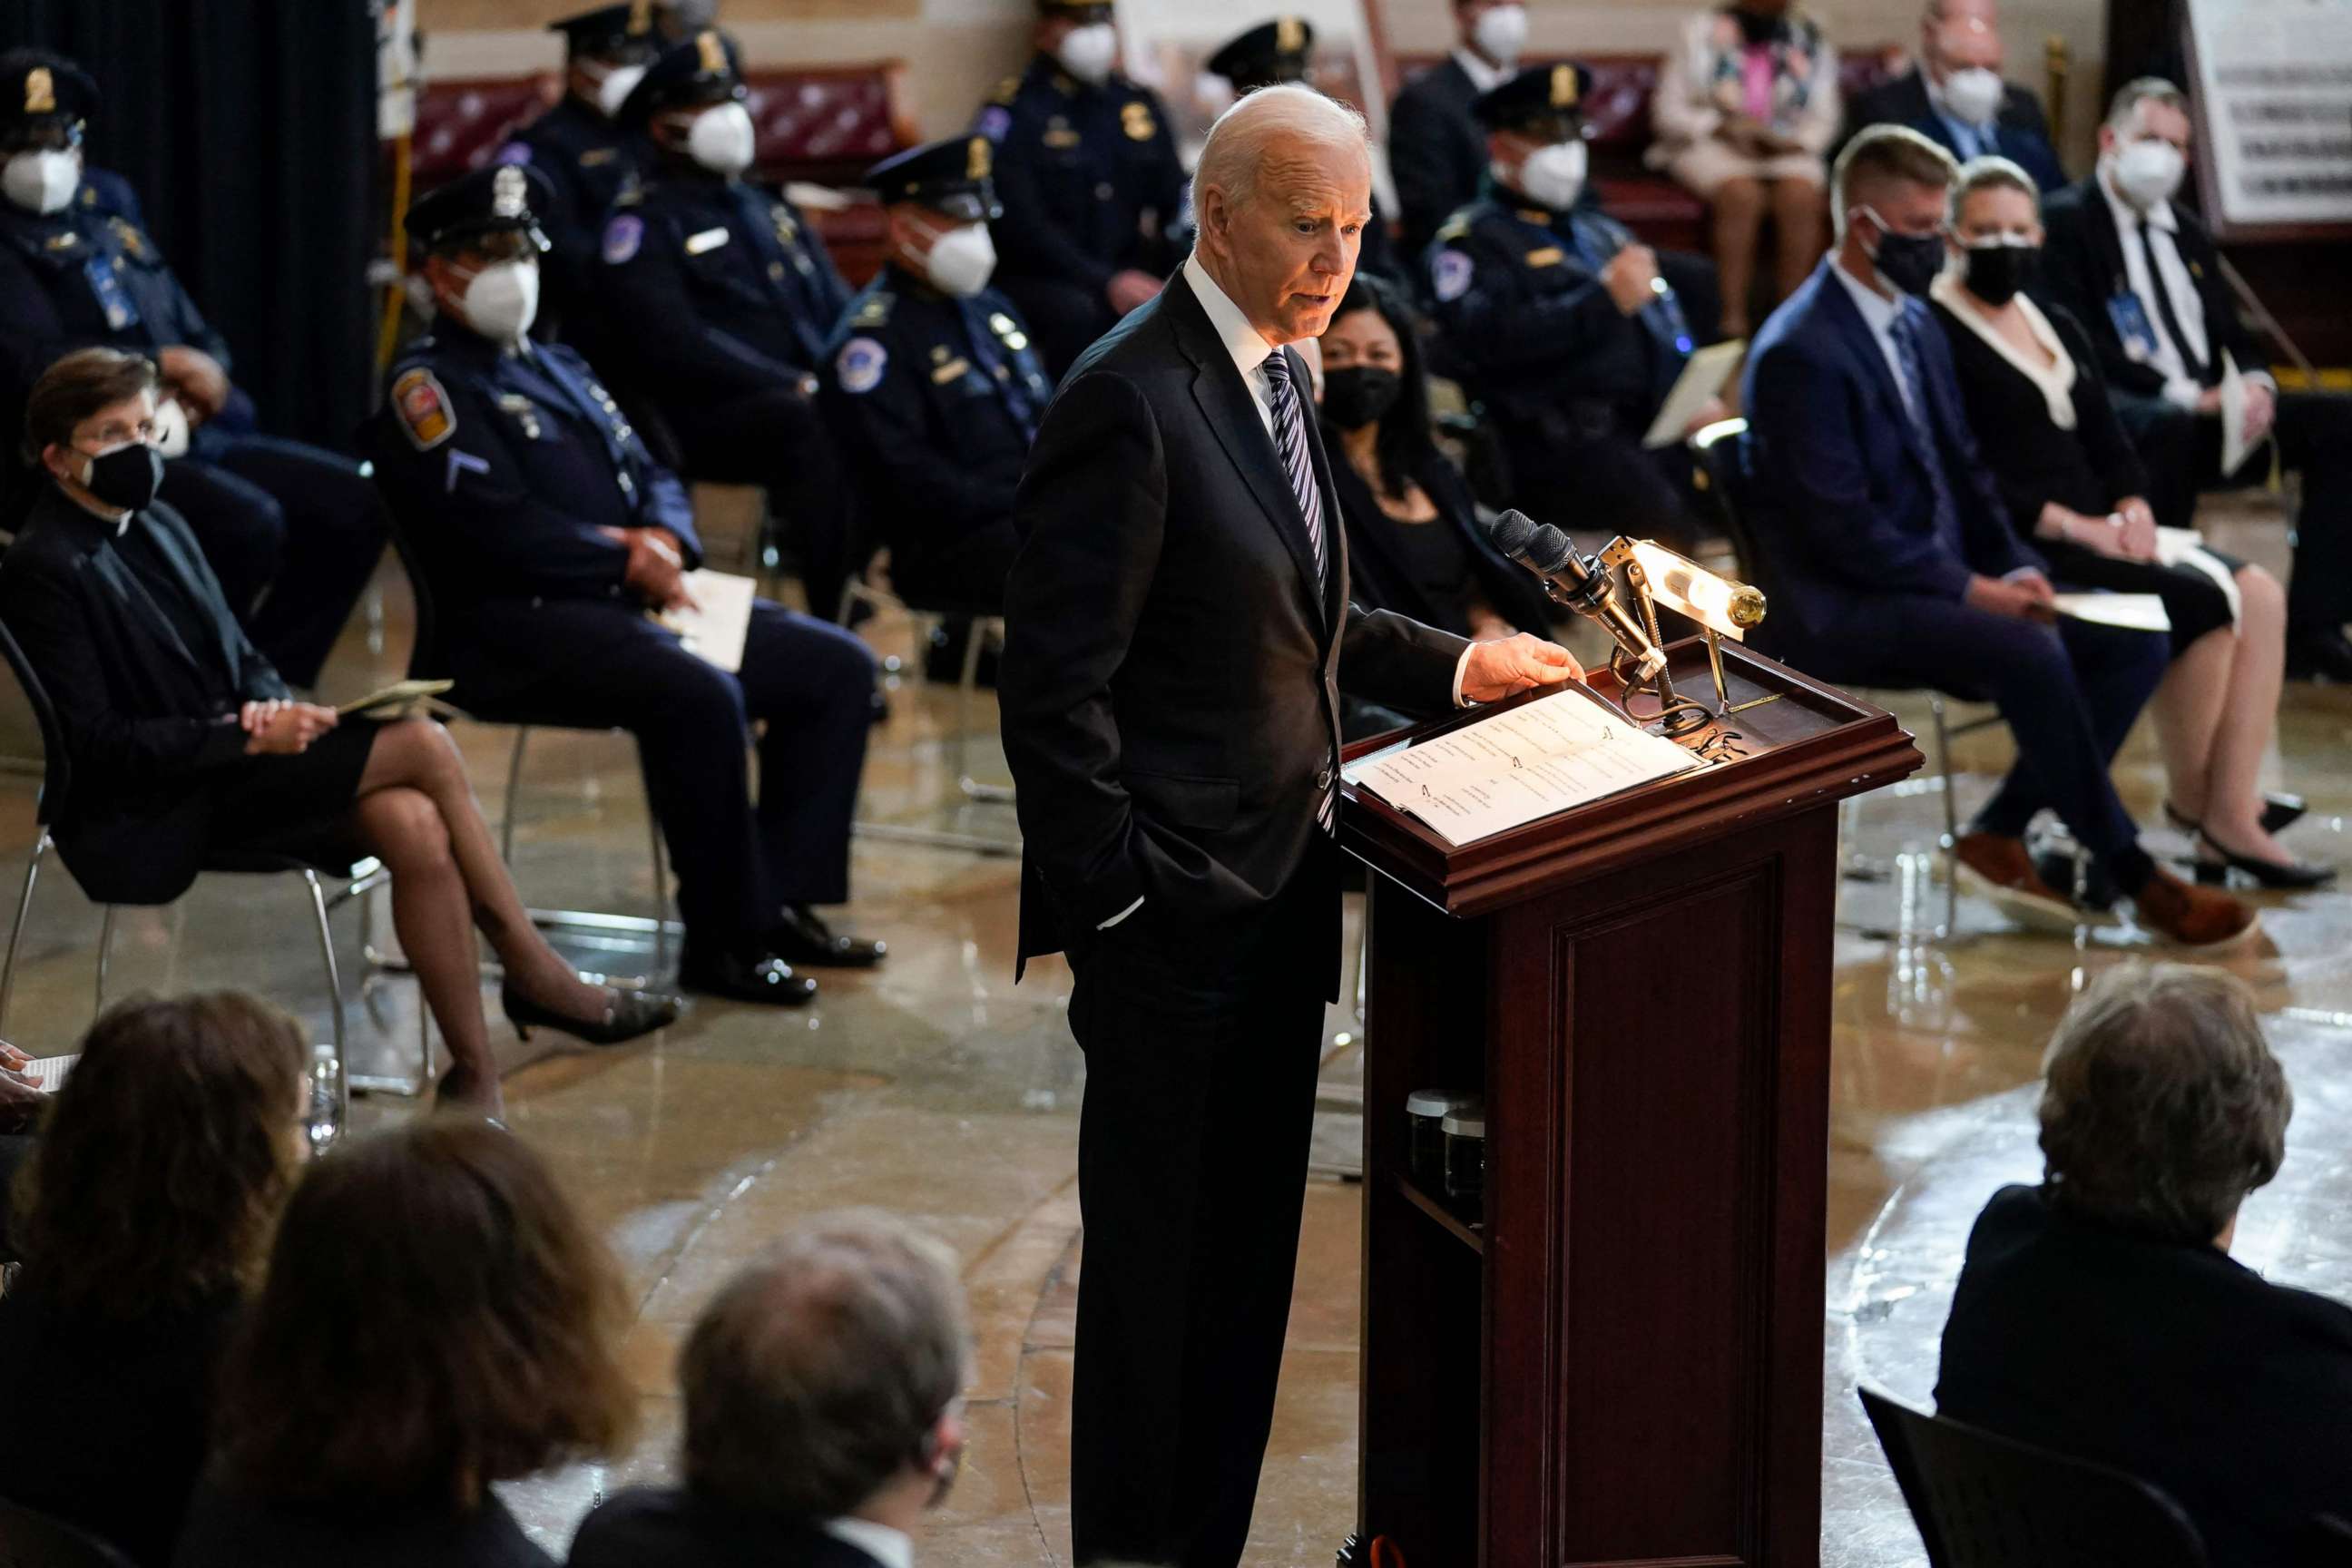 PHOTO: President Joe Biden speaks during a ceremony to honor slain Capitol Police Officer William "Billy" Evans as he lies in honor at the Capitol in Washington, DC, April 13, 2021.